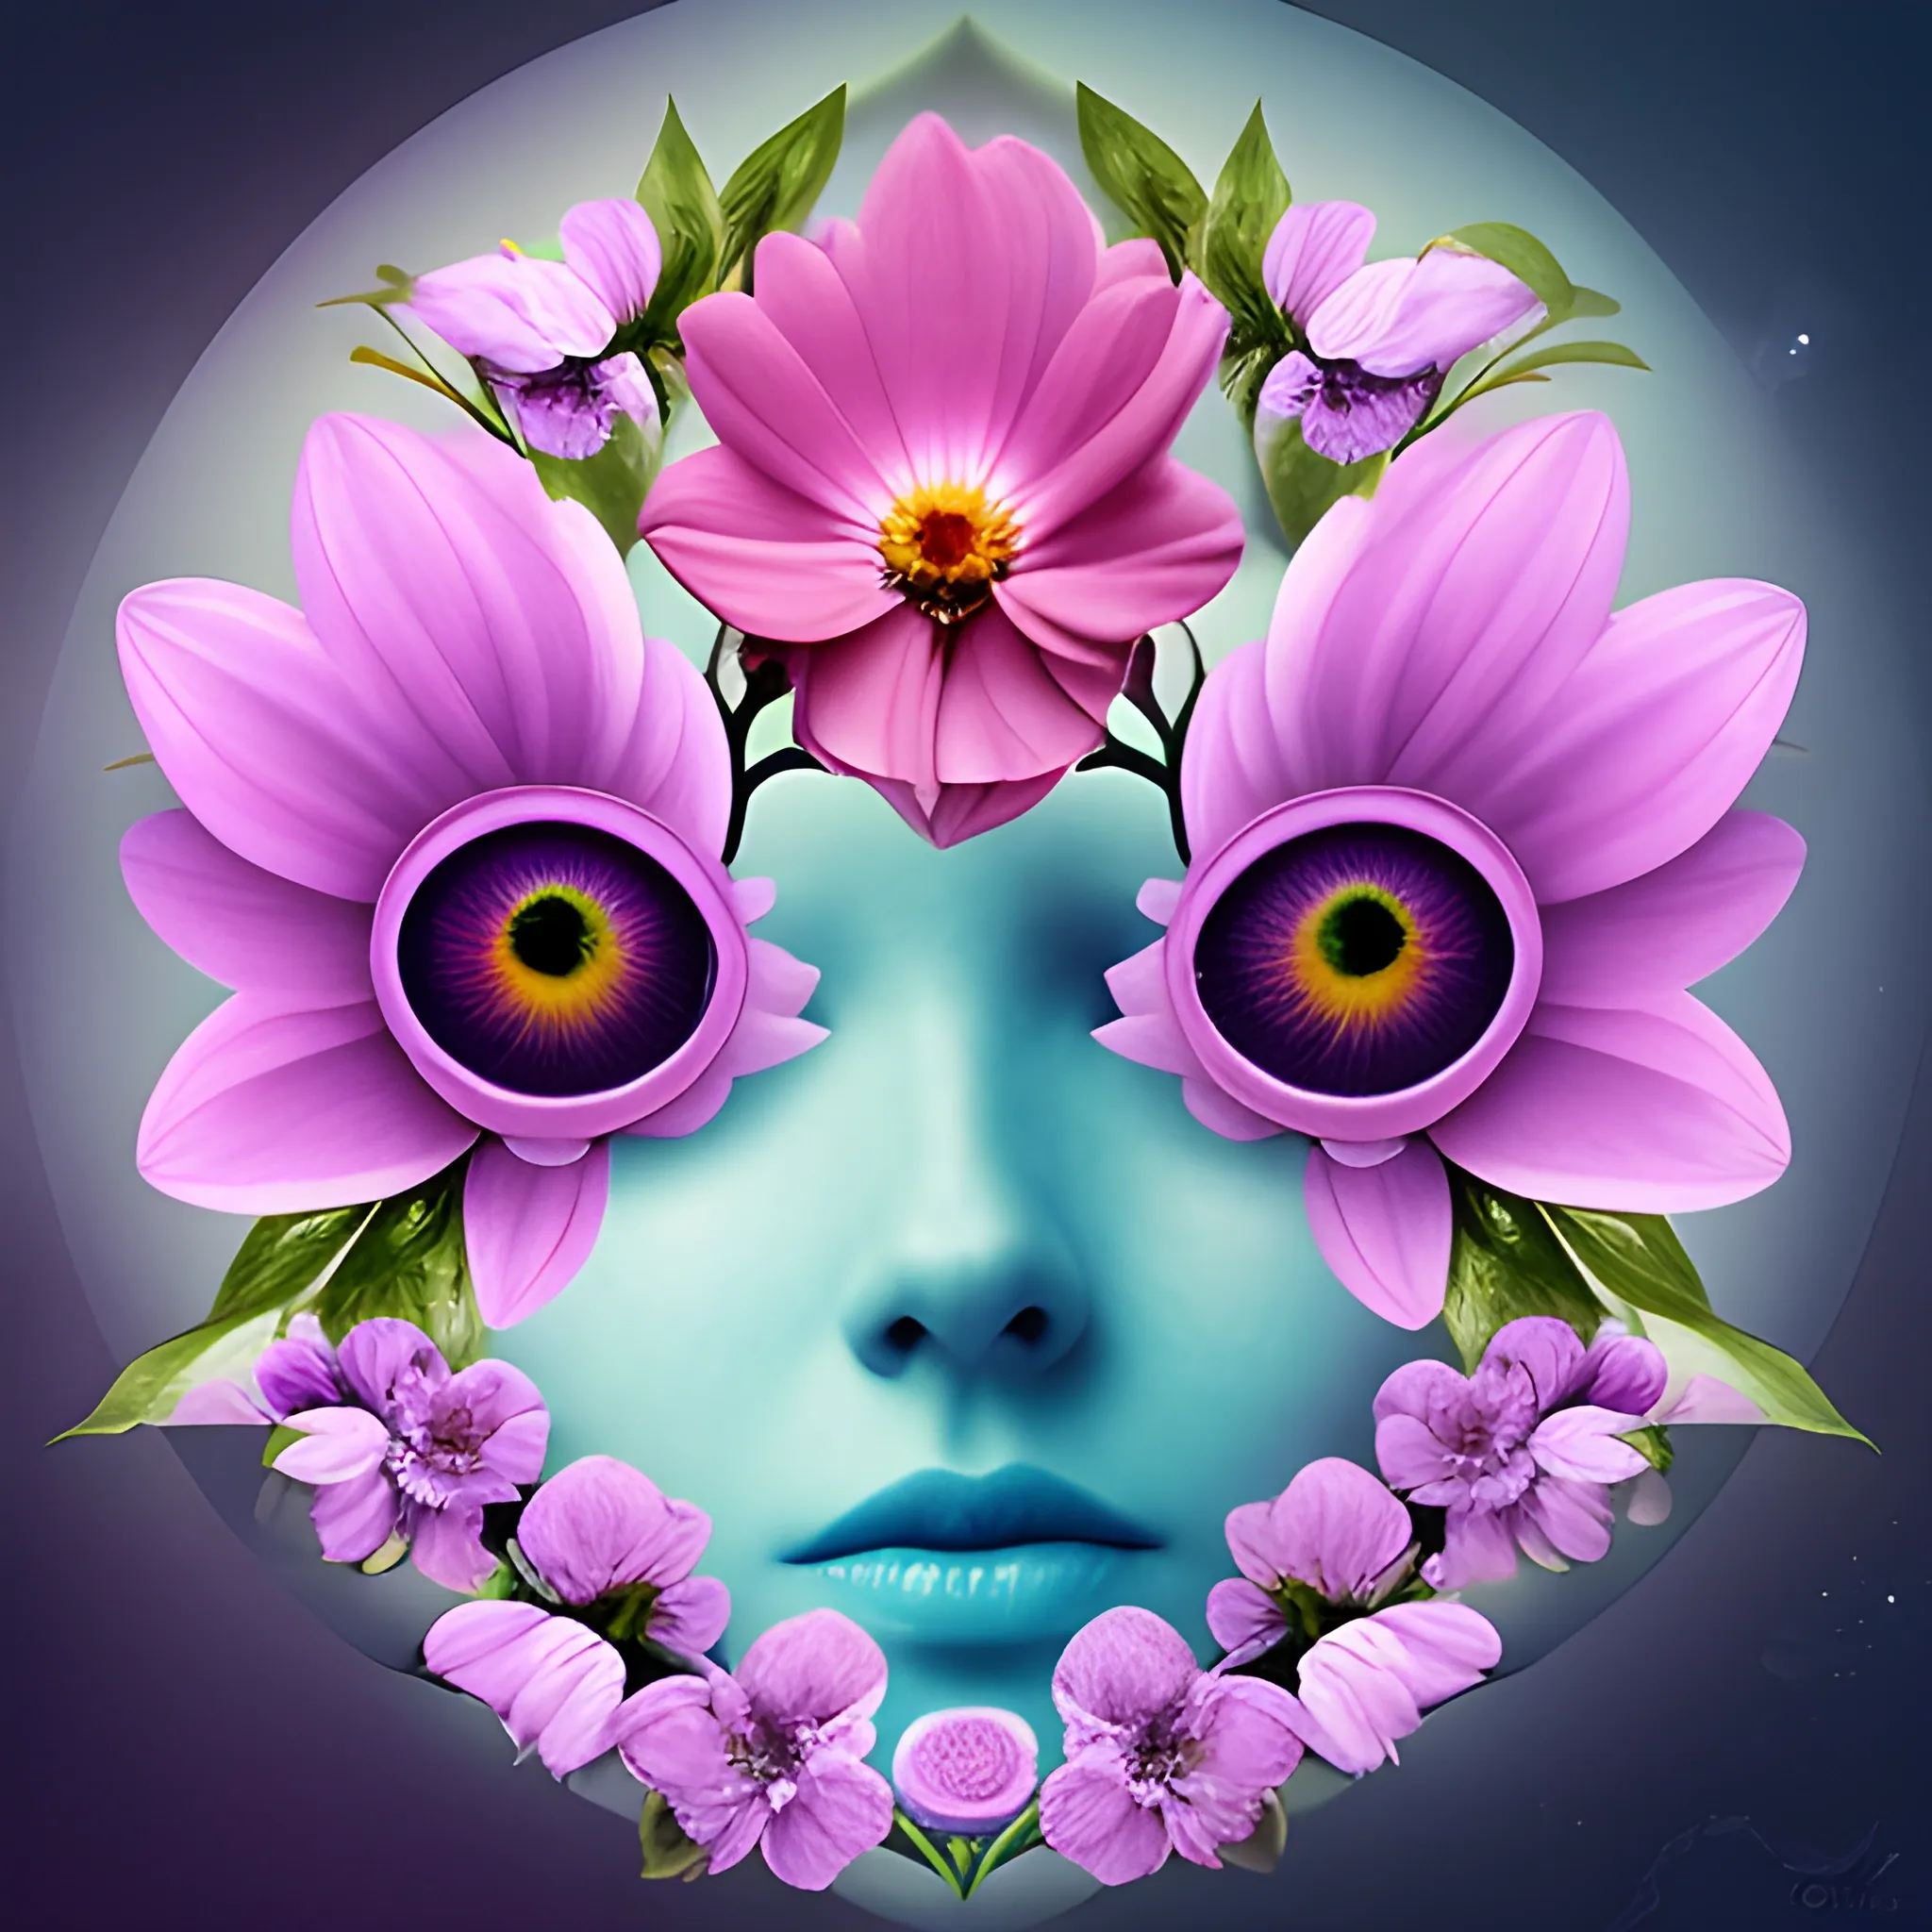 a dreamy flower with human eyes inside on its petals, by tschabalala self